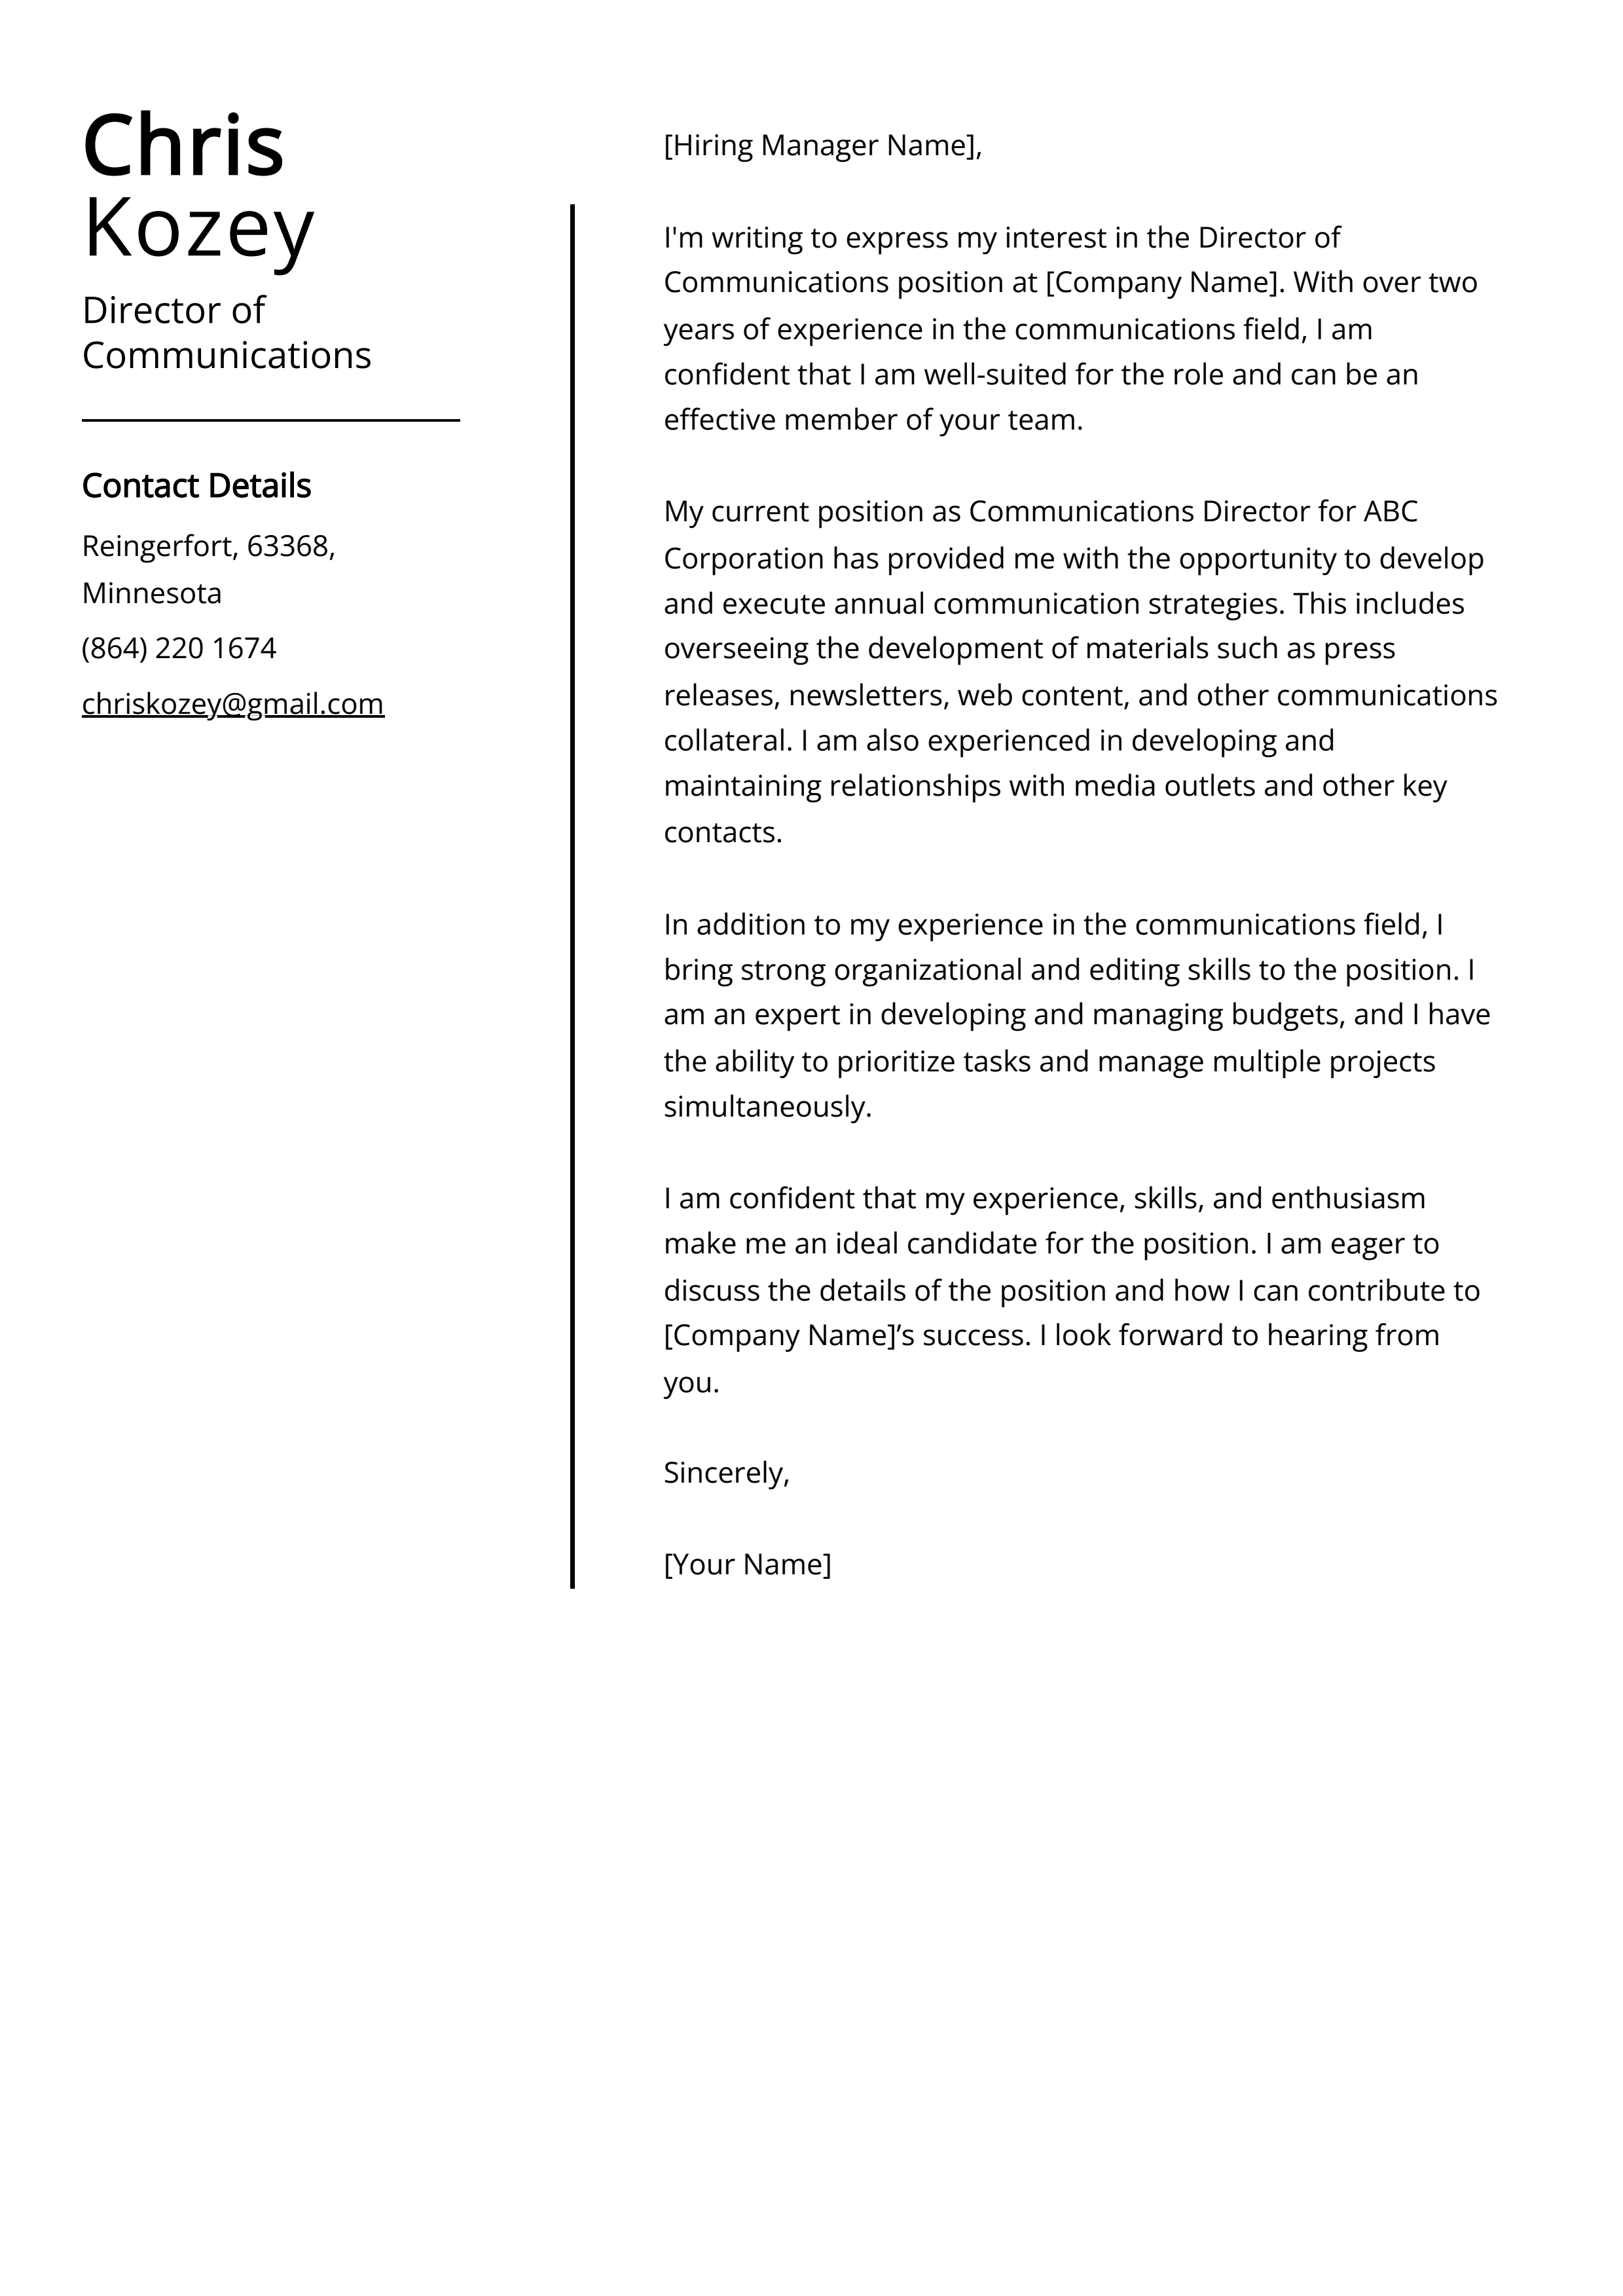 Director of Communications Cover Letter Example